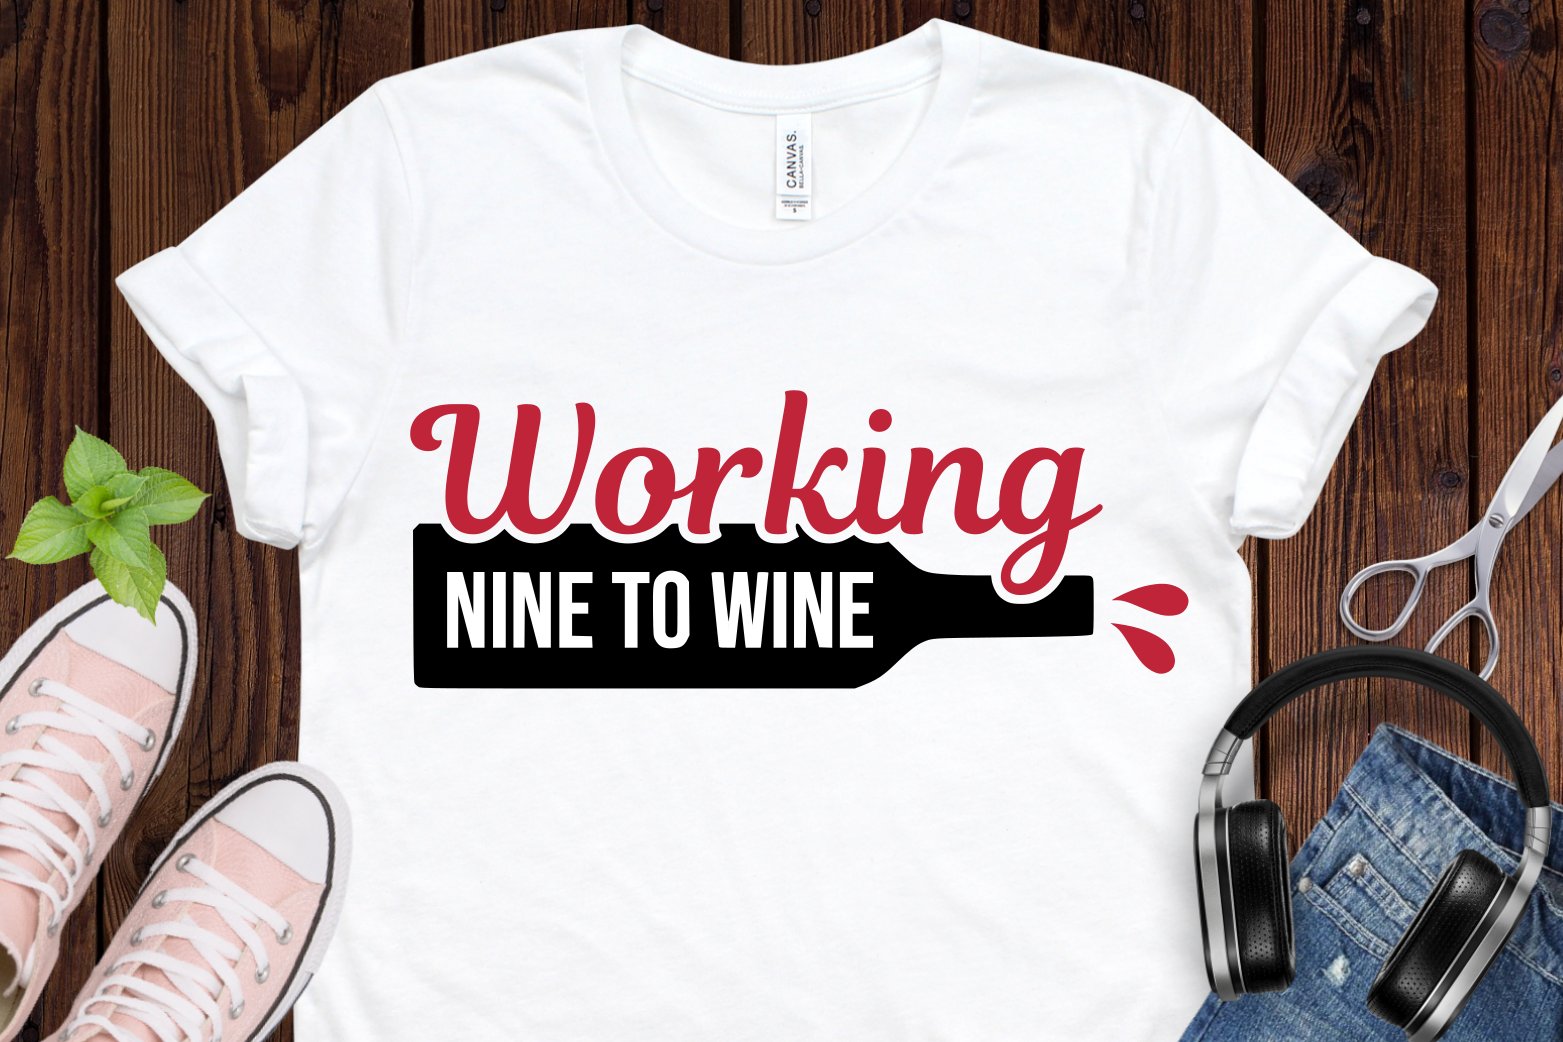 A t-shirt with wine and phrase.